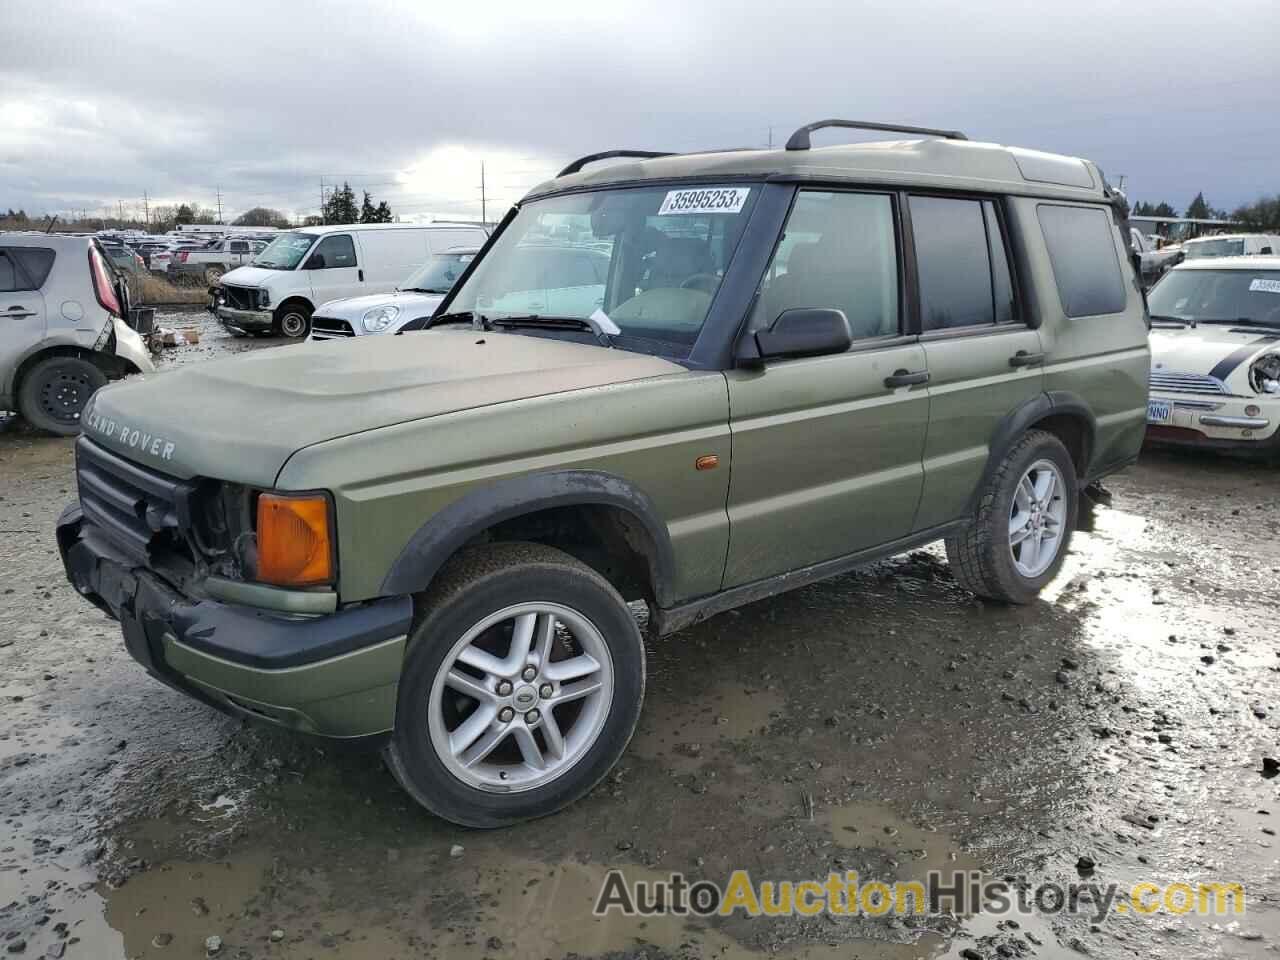 2000 LAND ROVER DISCOVERY, SALTY1542YA264181